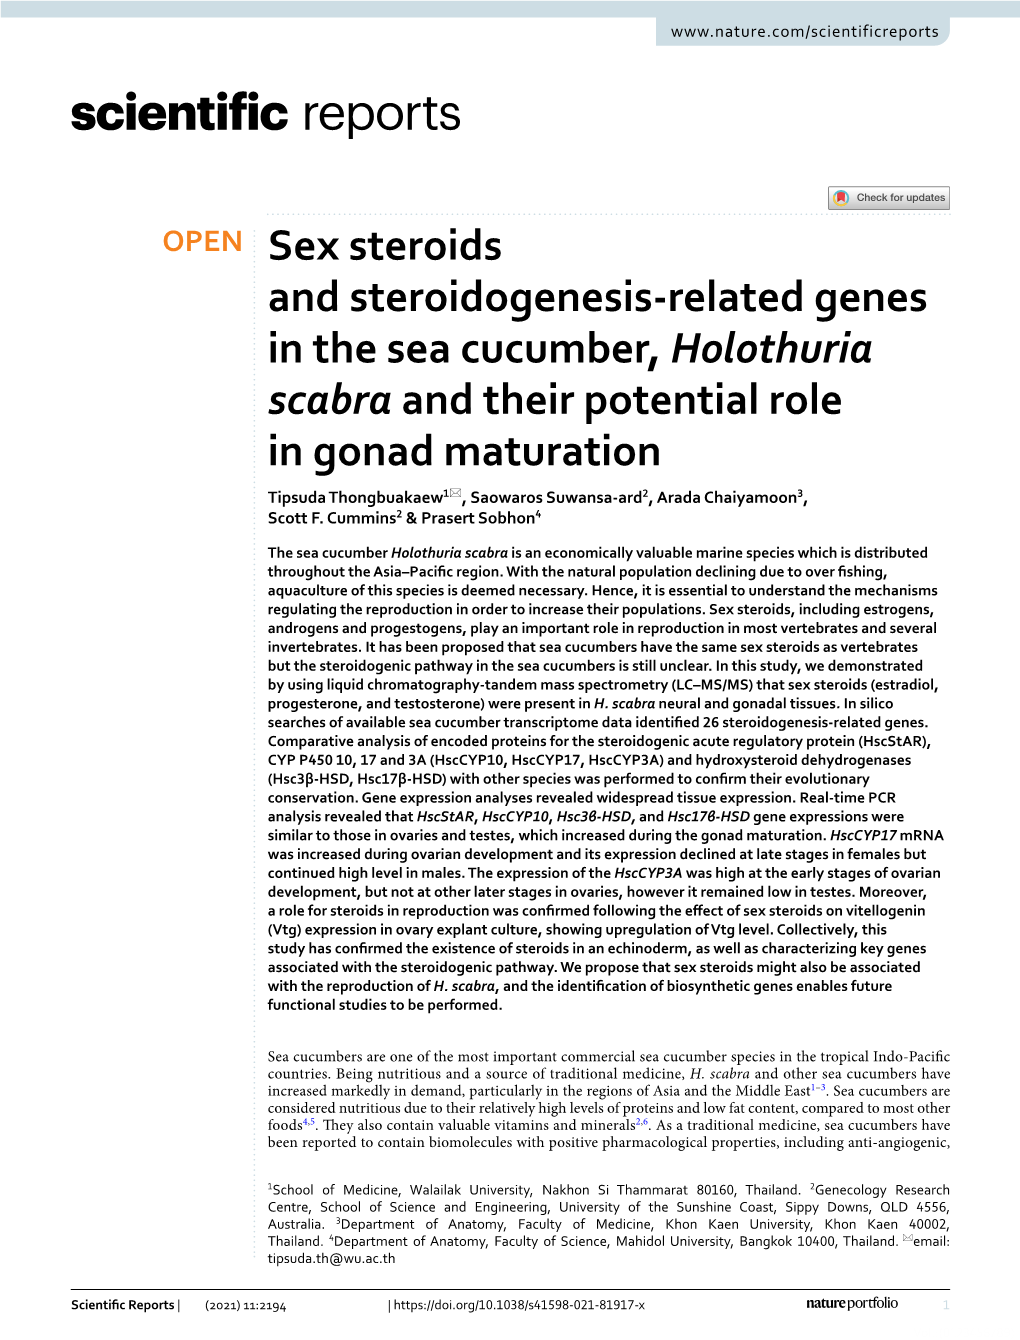 Sex Steroids and Steroidogenesis-Related Genes In